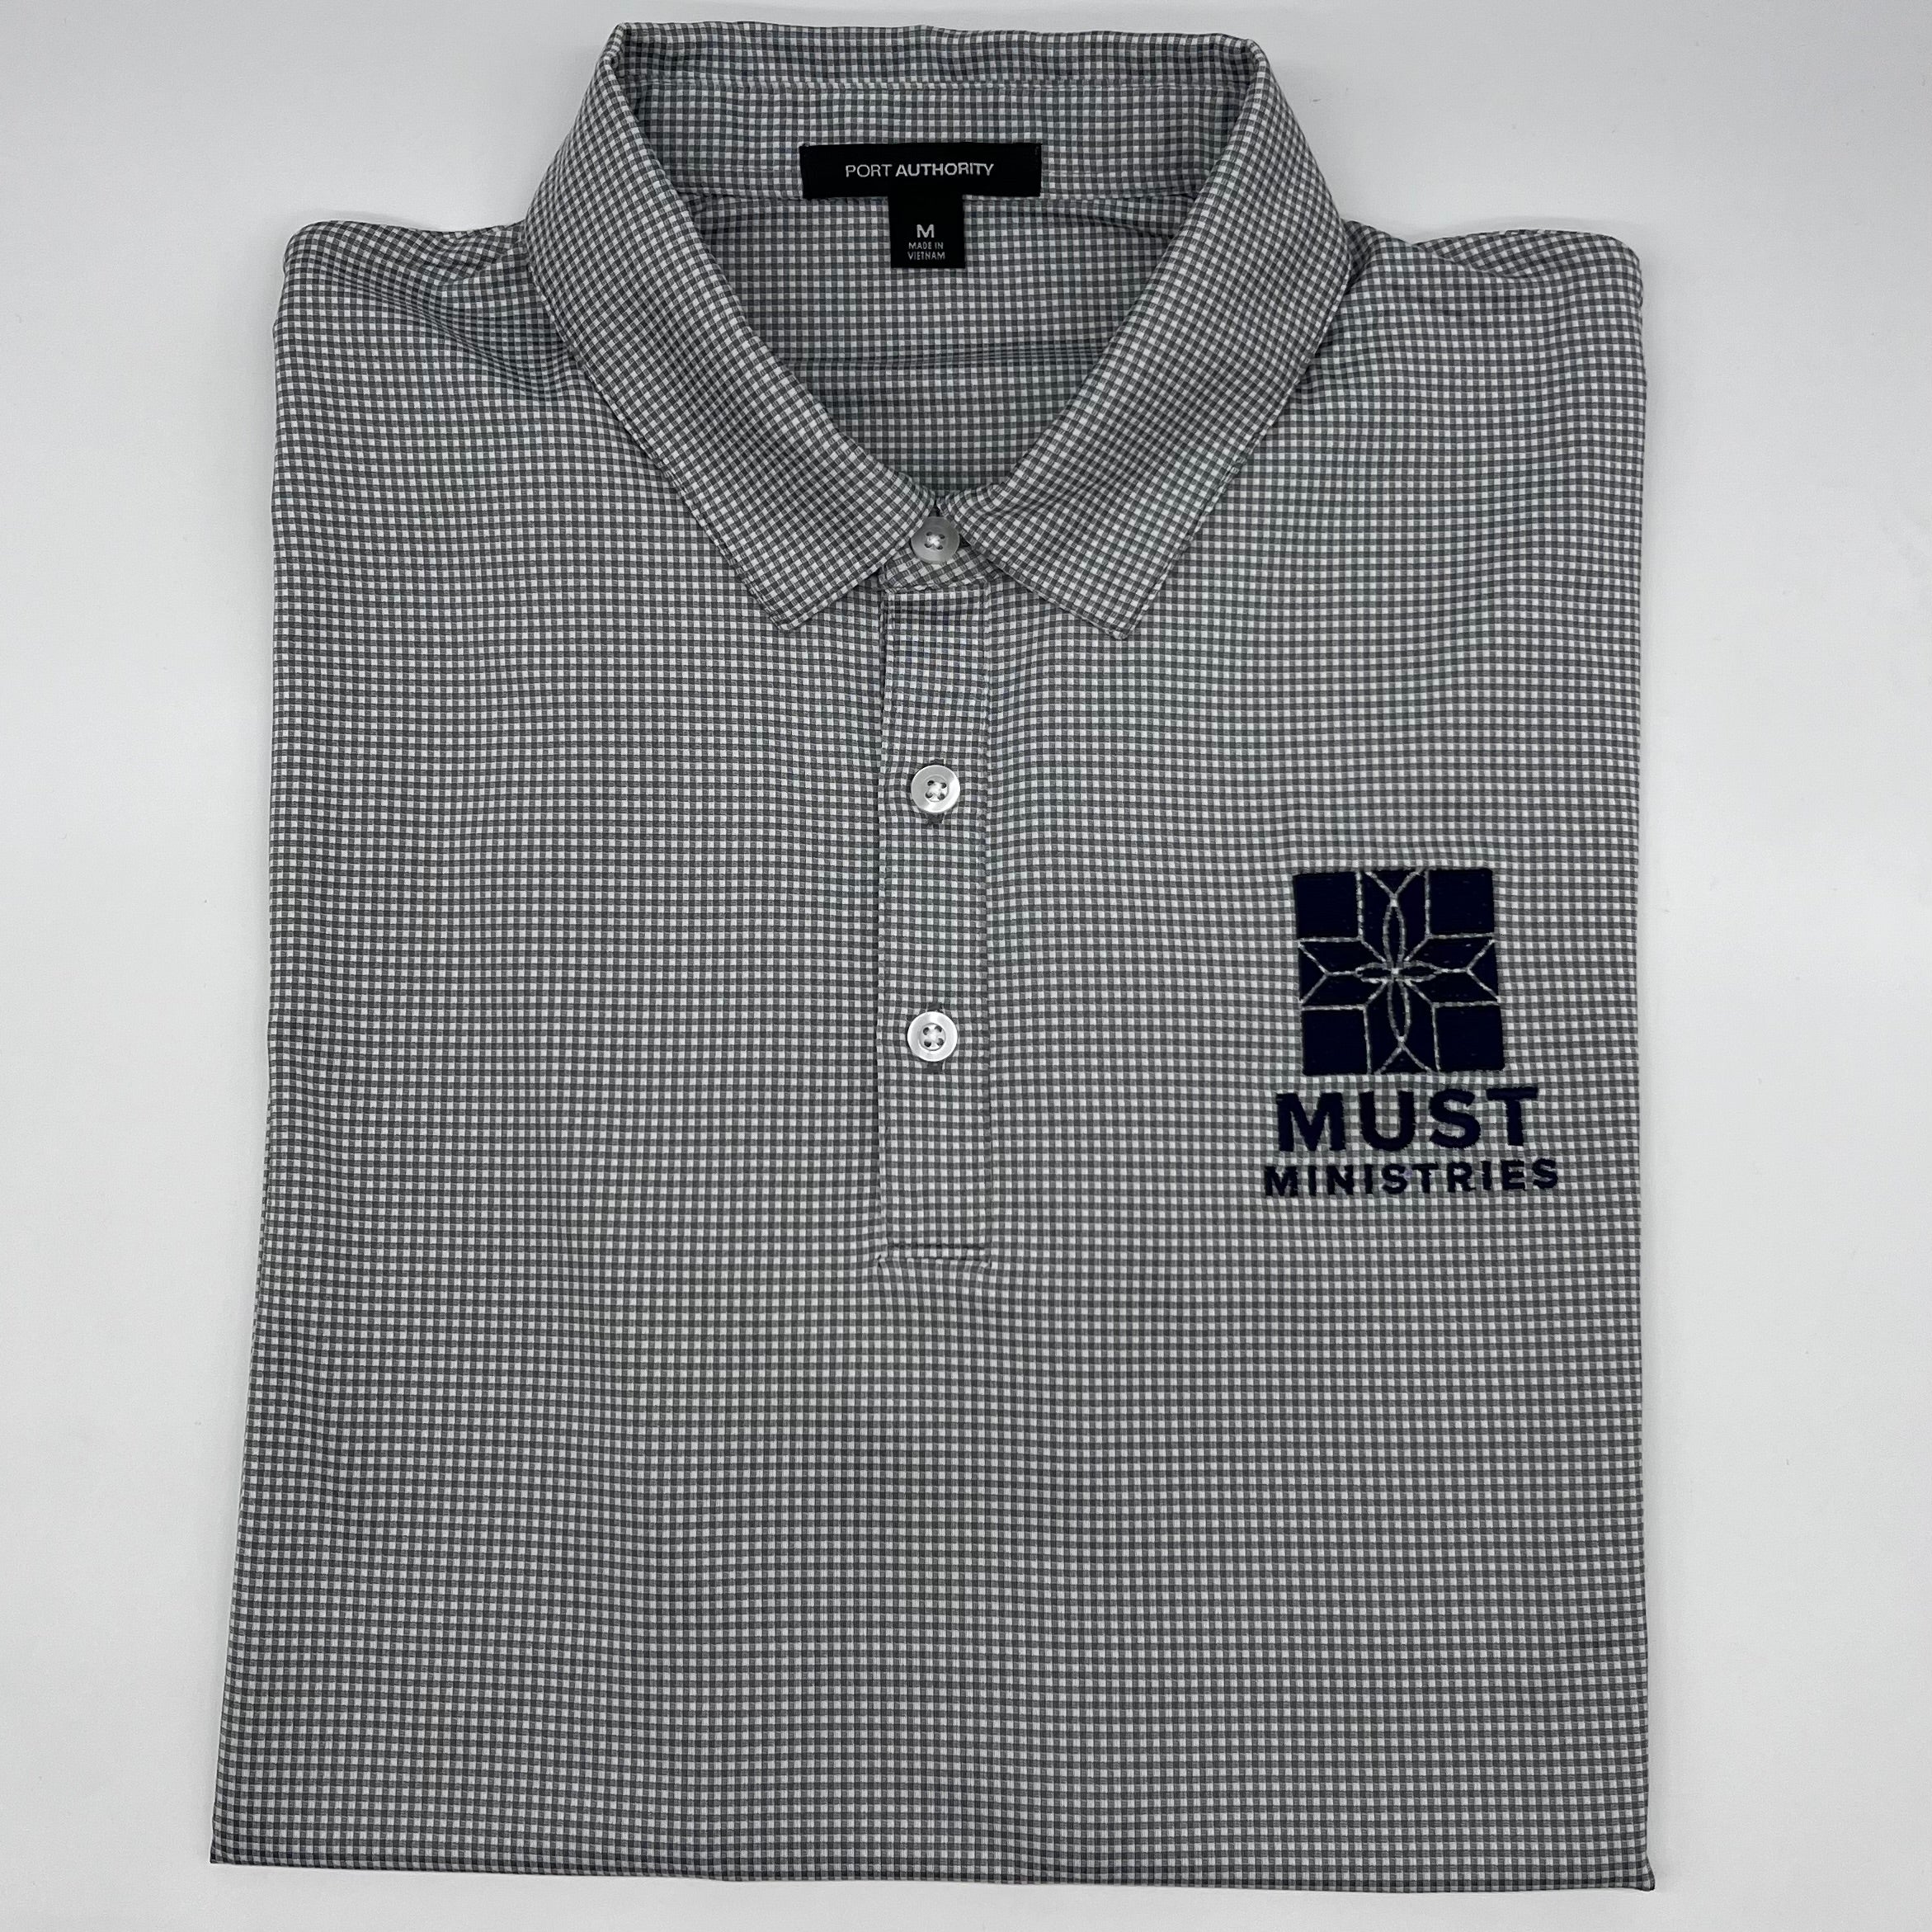 MUST Ministries Men's Polo